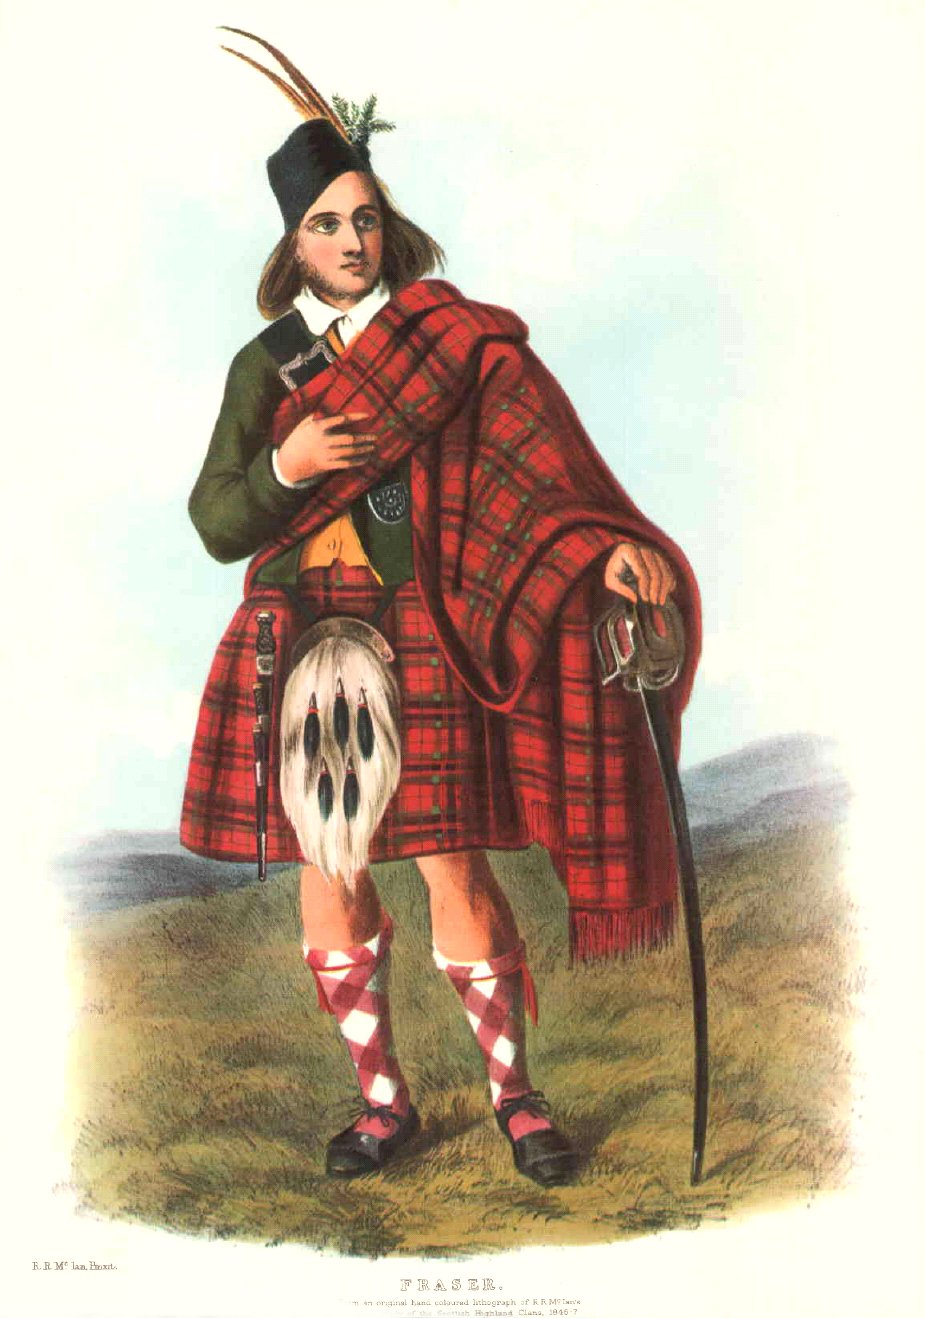 McIan's Costumes of the Clans of Scotland